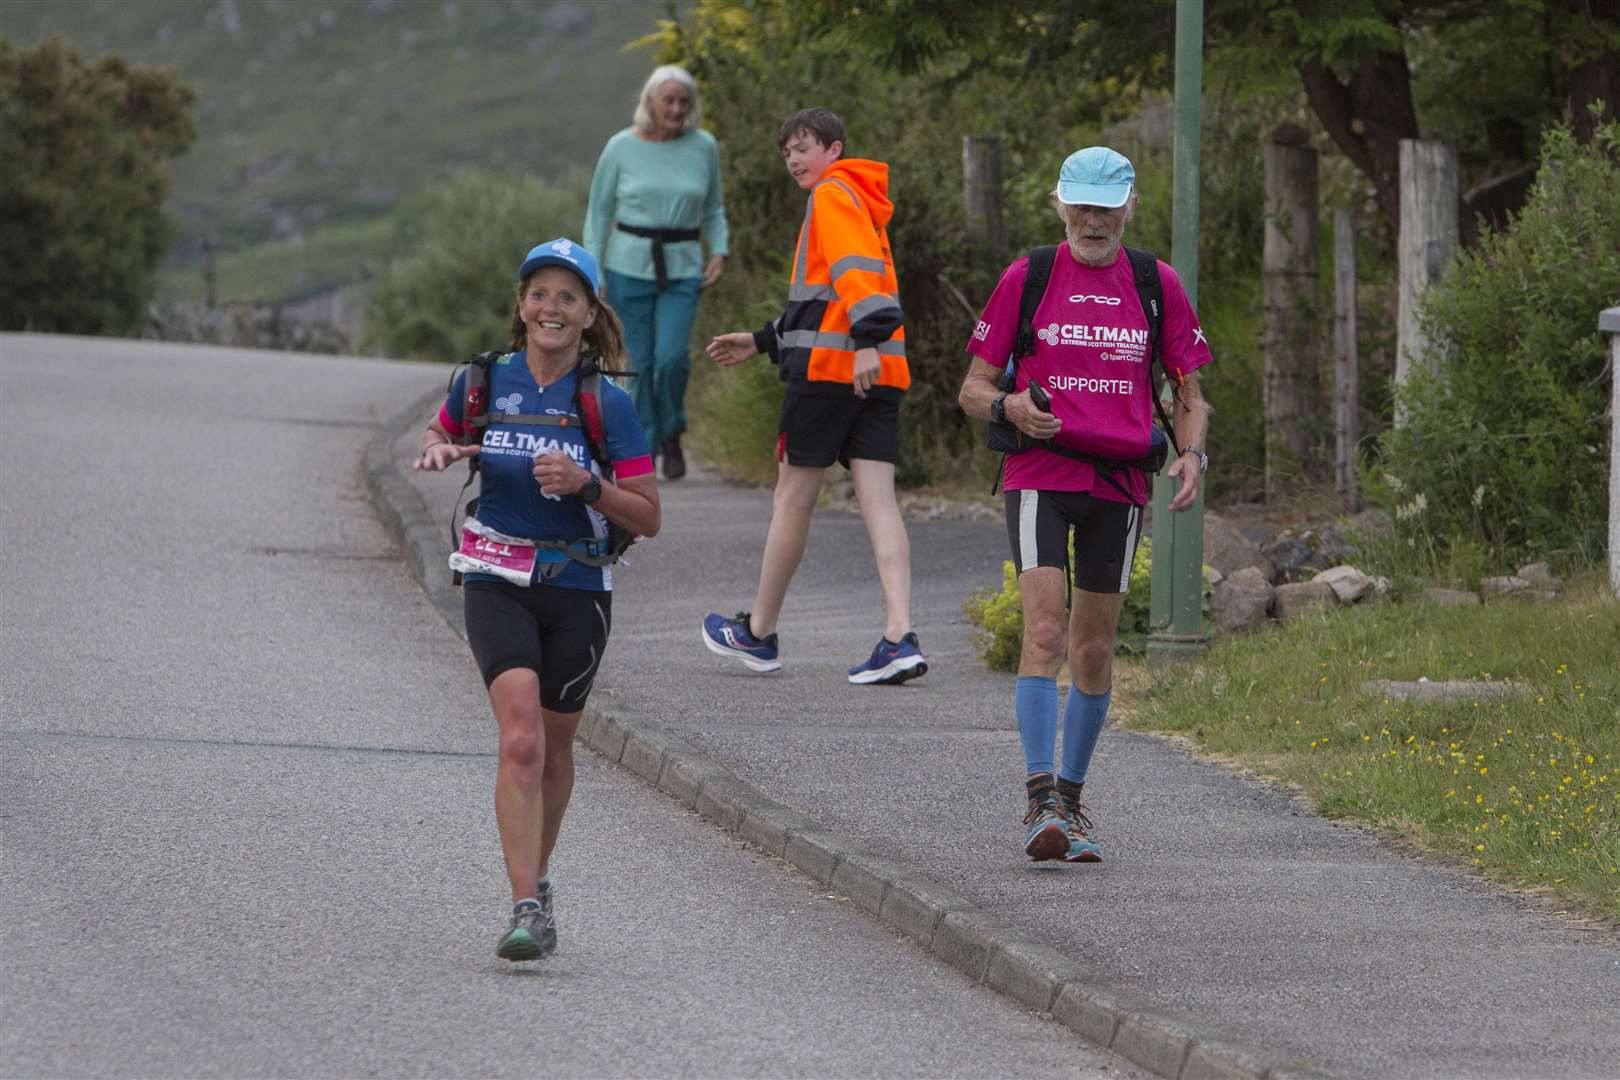 A happy Lorna Stanger, in Torrodon, a few yards from completing her 6th Celtman Extreme Scottish Marathon. Photograph: Robert MacDonald/Northern Studios